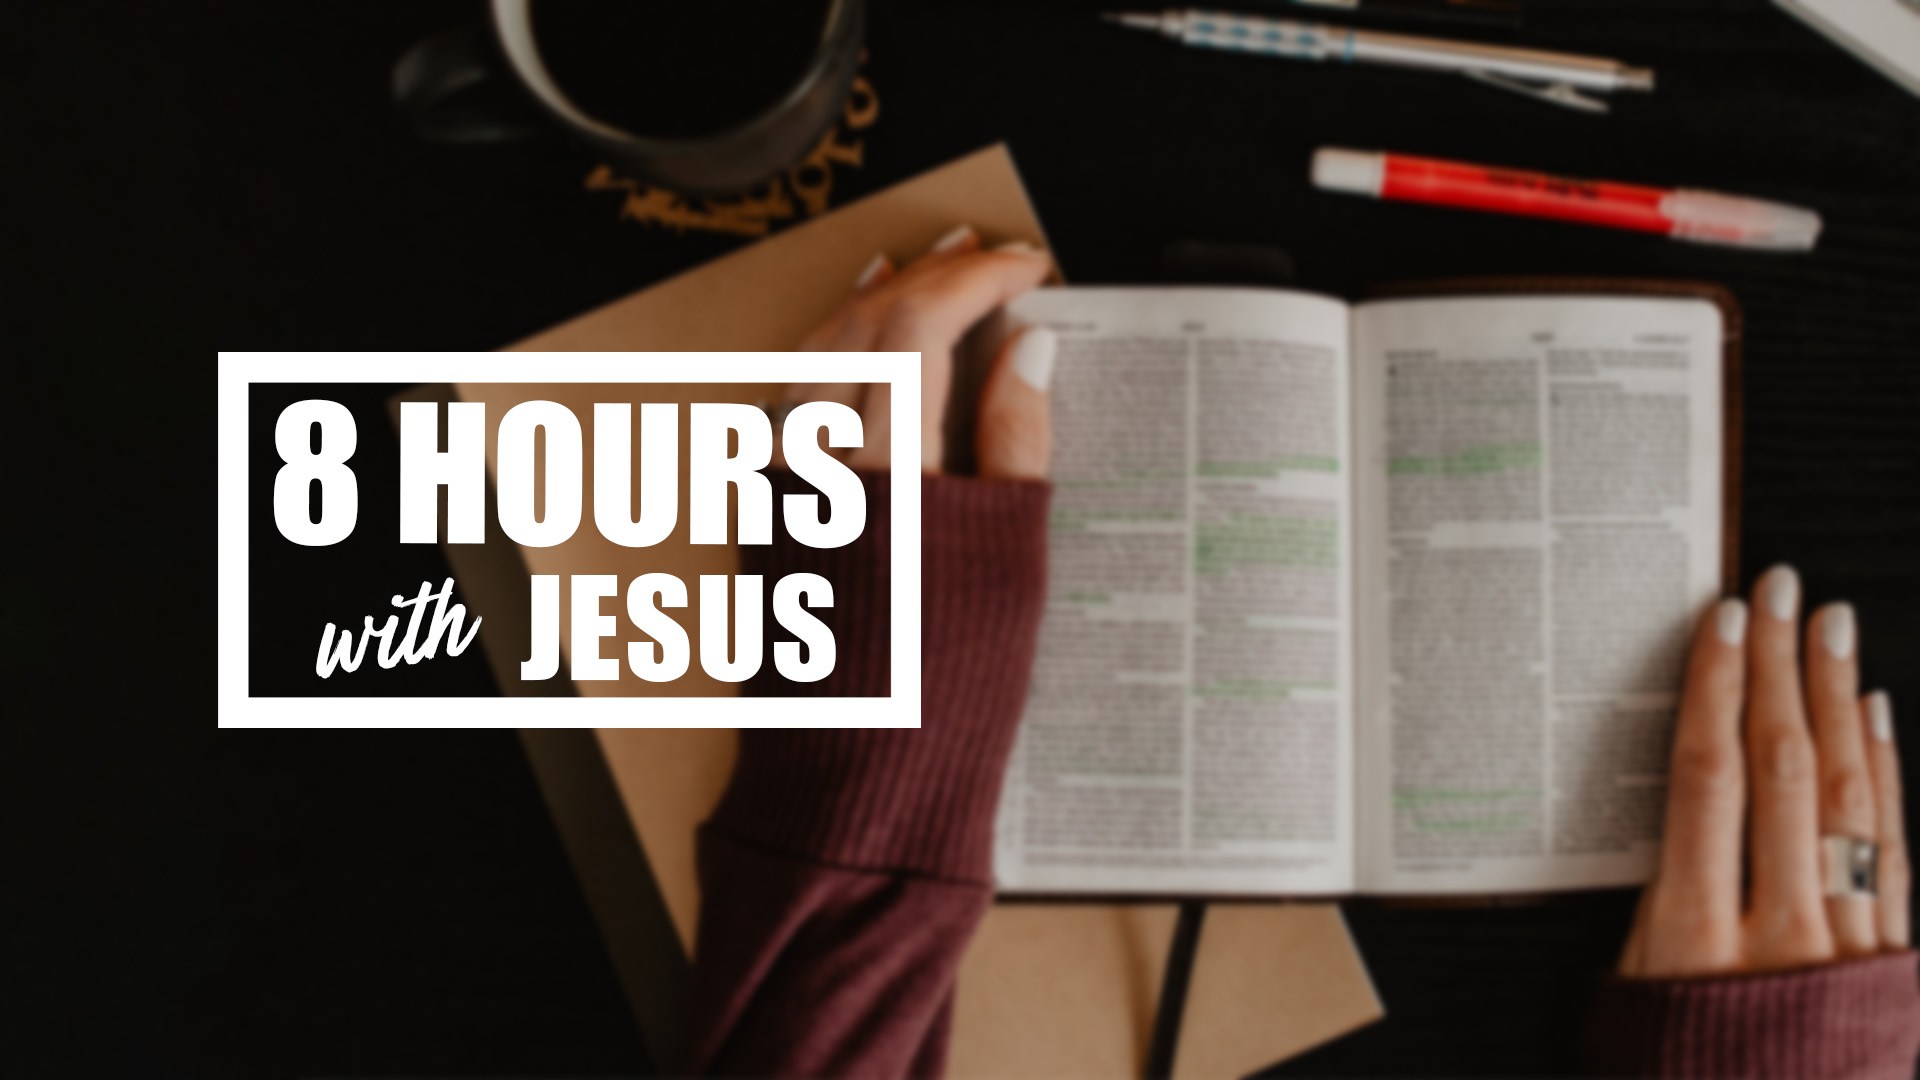 8 Hours with Jesus

Saturday | 8:00am to 4:30pm
April 1
